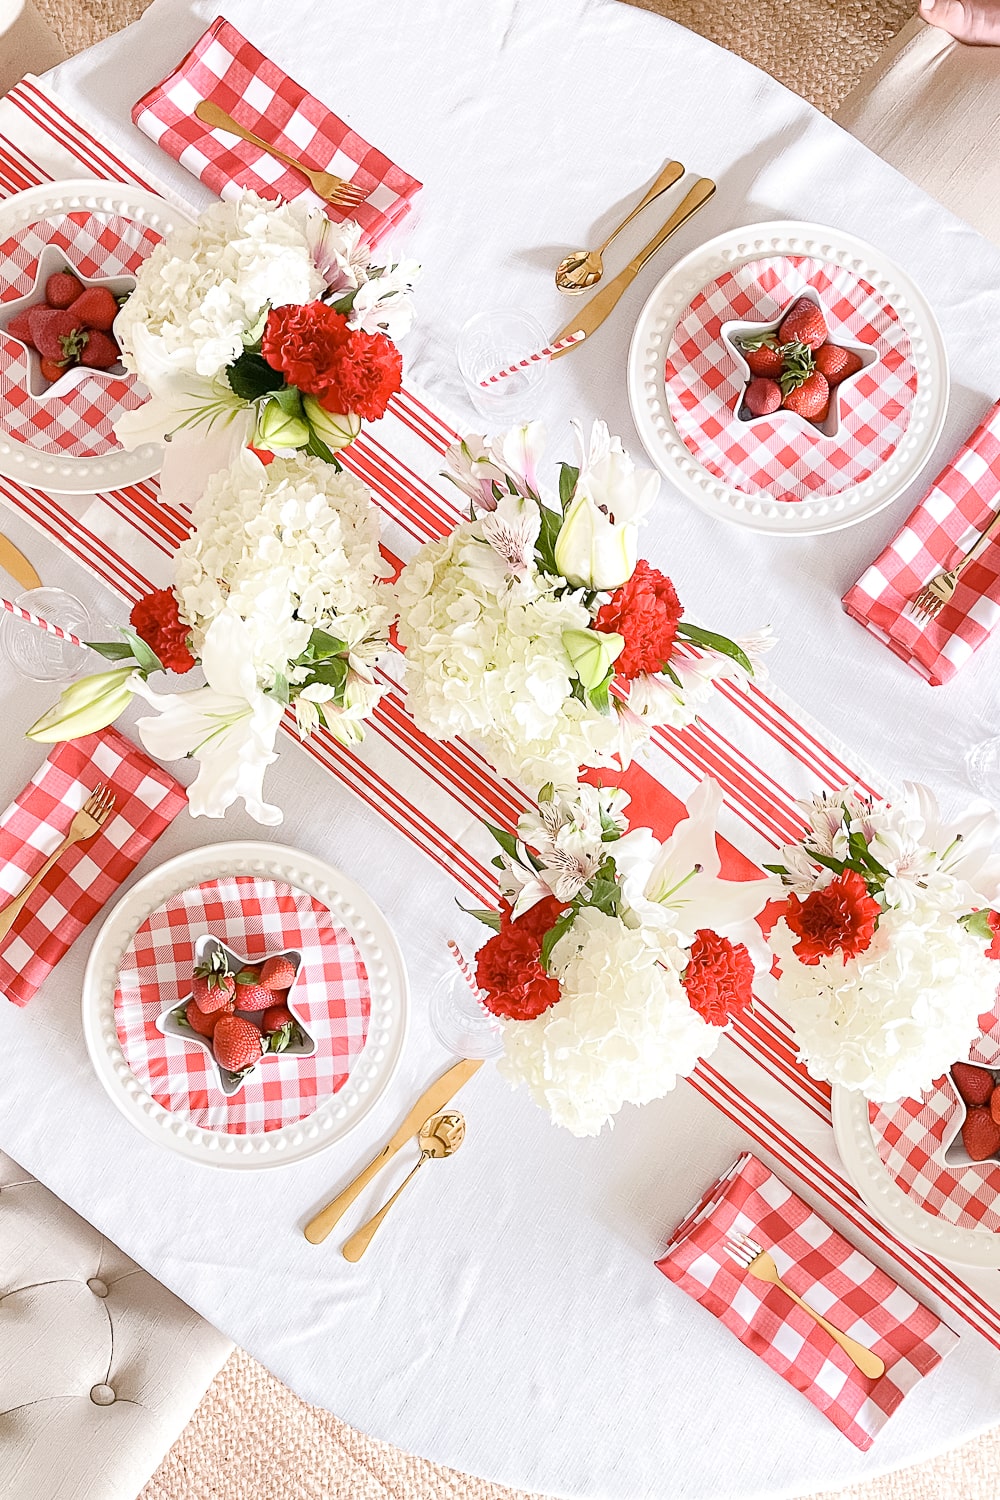 Simple patriotic table decor styled in an all red Memorial Day tablescape by blogger Stephanie Ziajka on Diary of a Debutante